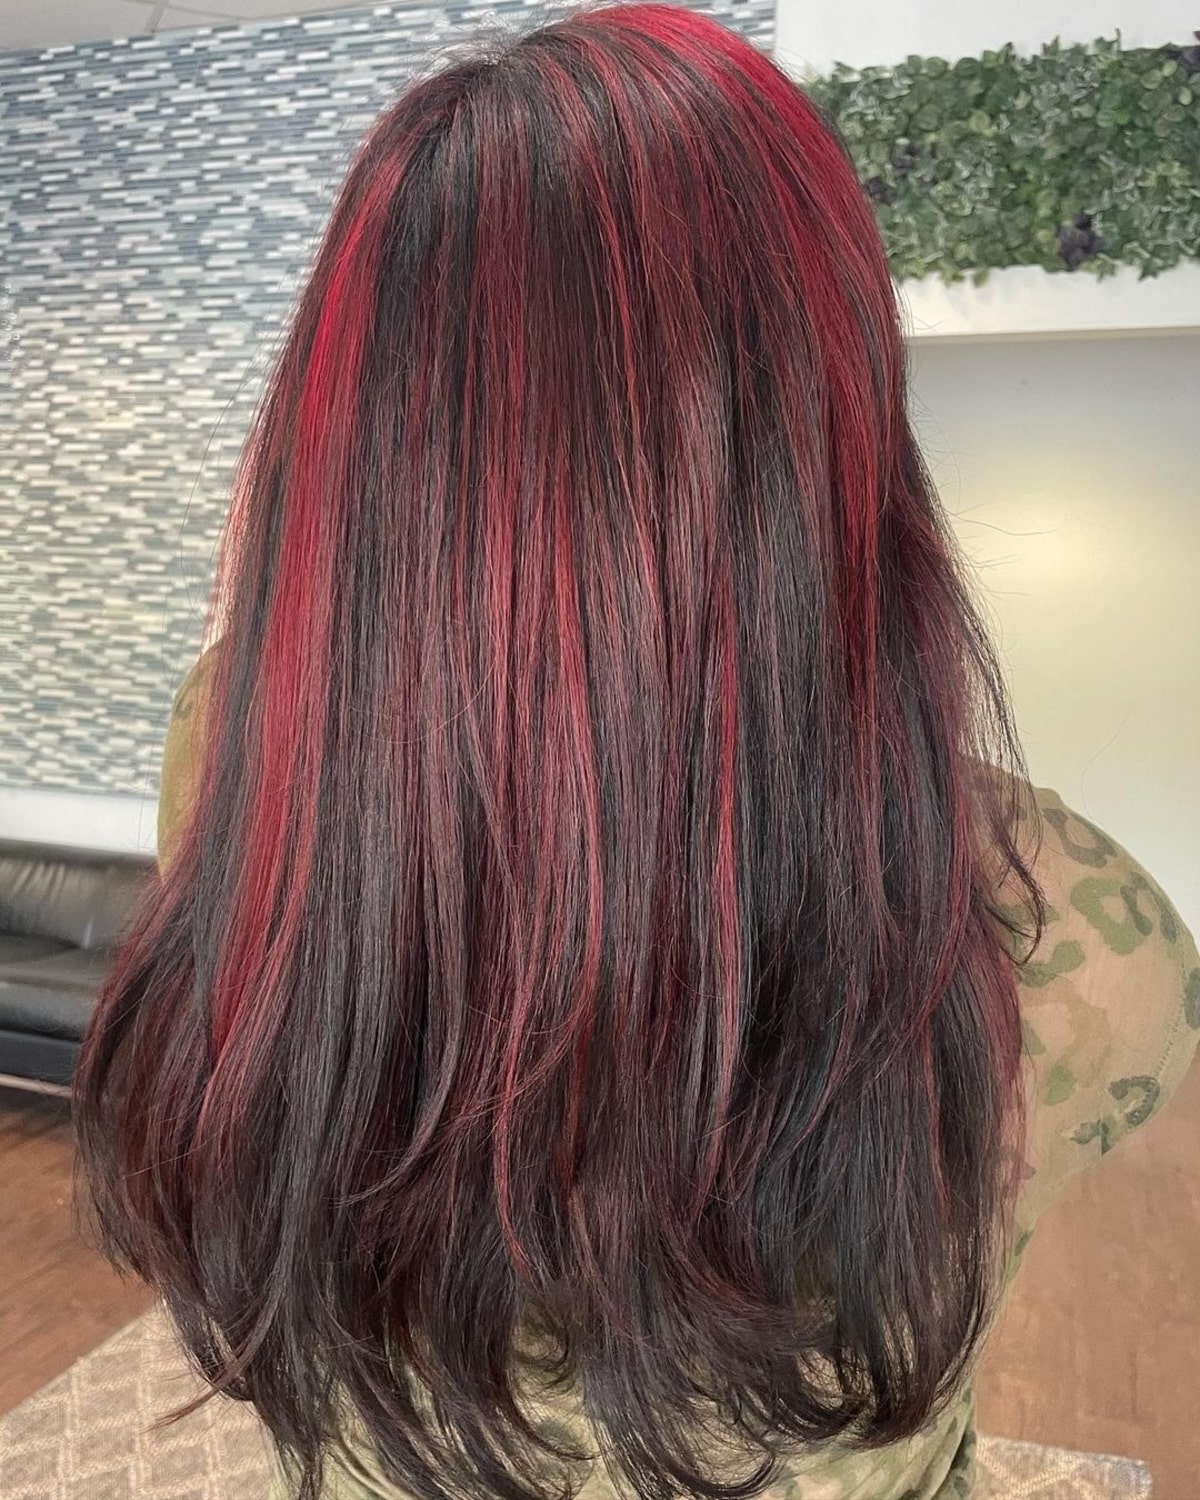 Best Black Hair With Red Highlights For Eye Catching Contrast